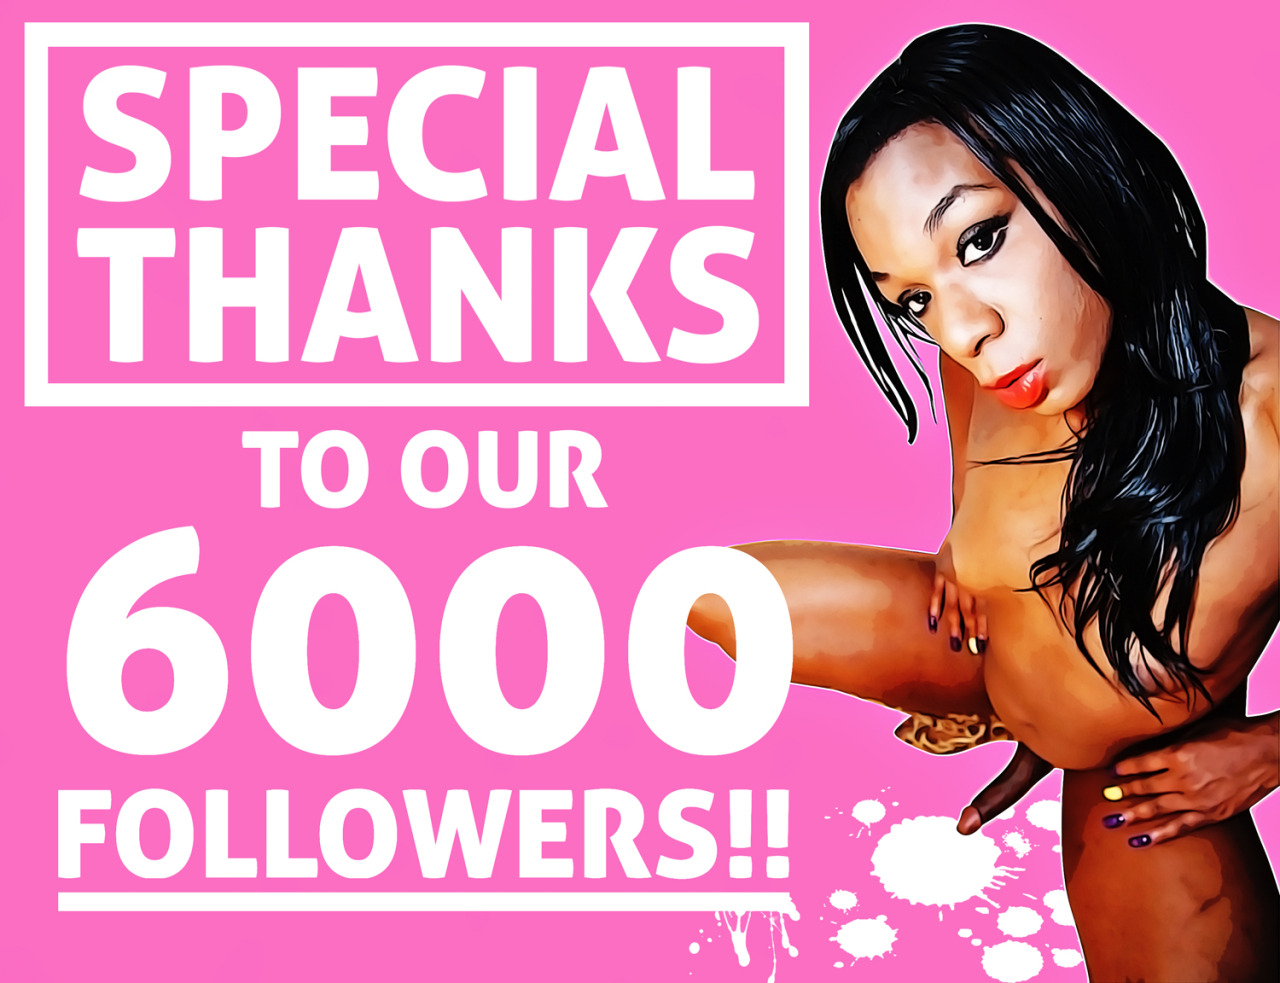 SpecialÂ Thanks to our 6000 followers!if you are not subscribed yet, do it by clicking